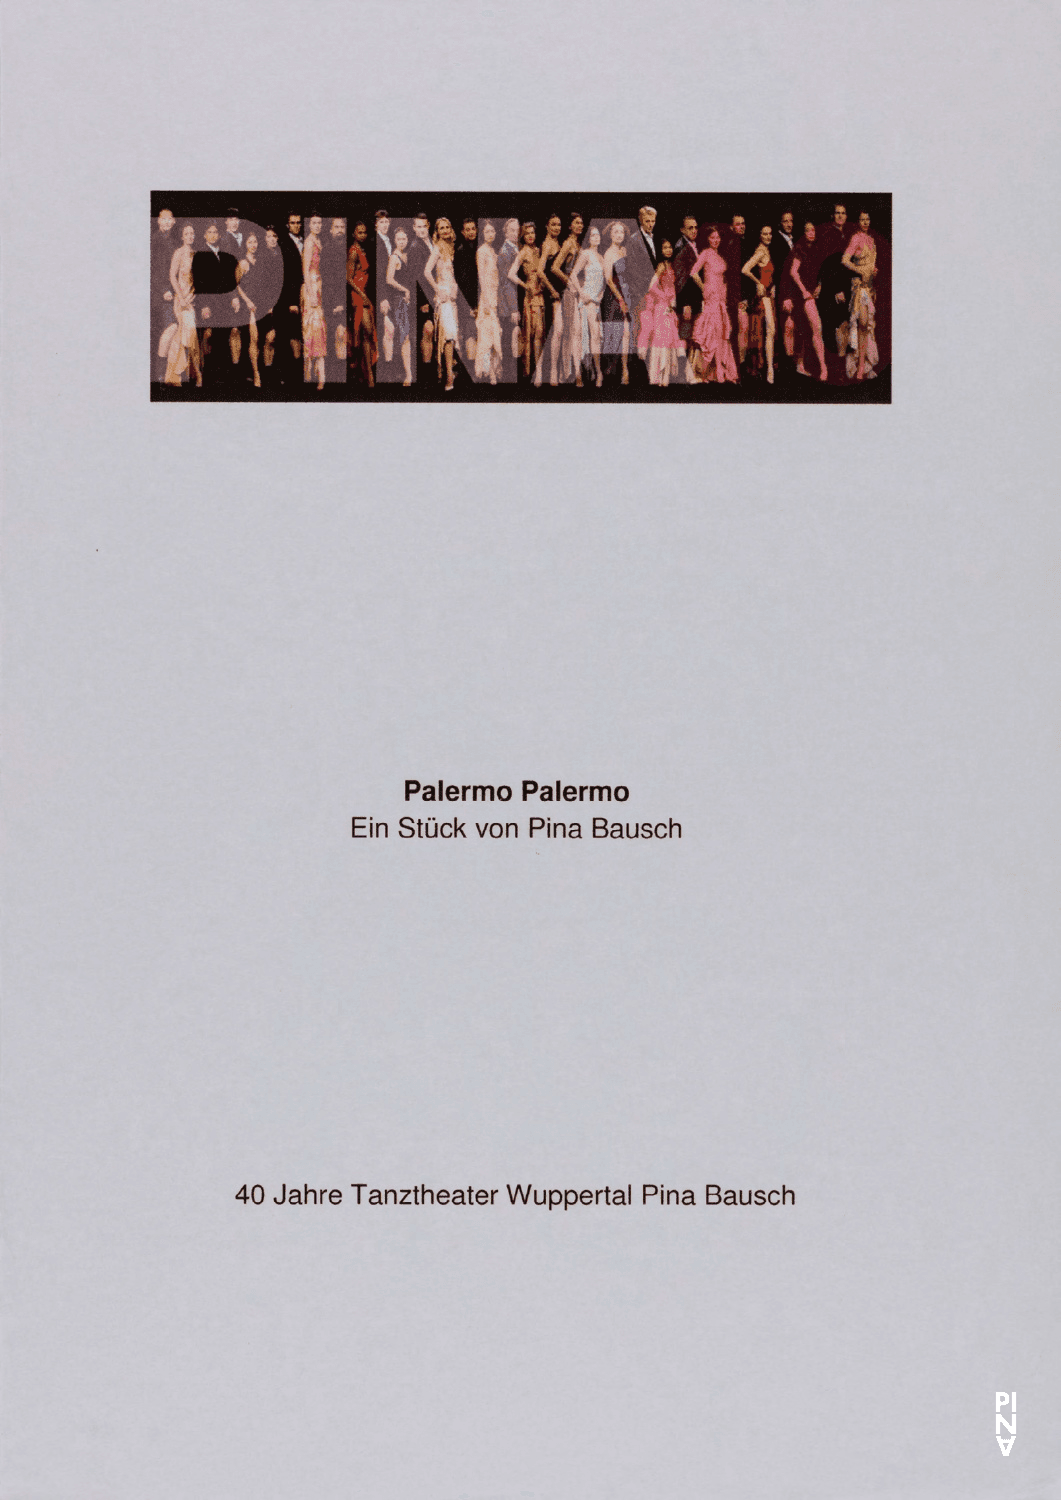 Evening leaflet for “Palermo Palermo” by Pina Bausch with Tanztheater Wuppertal in in Wuppertal, 09/05/2013 – 09/08/2013